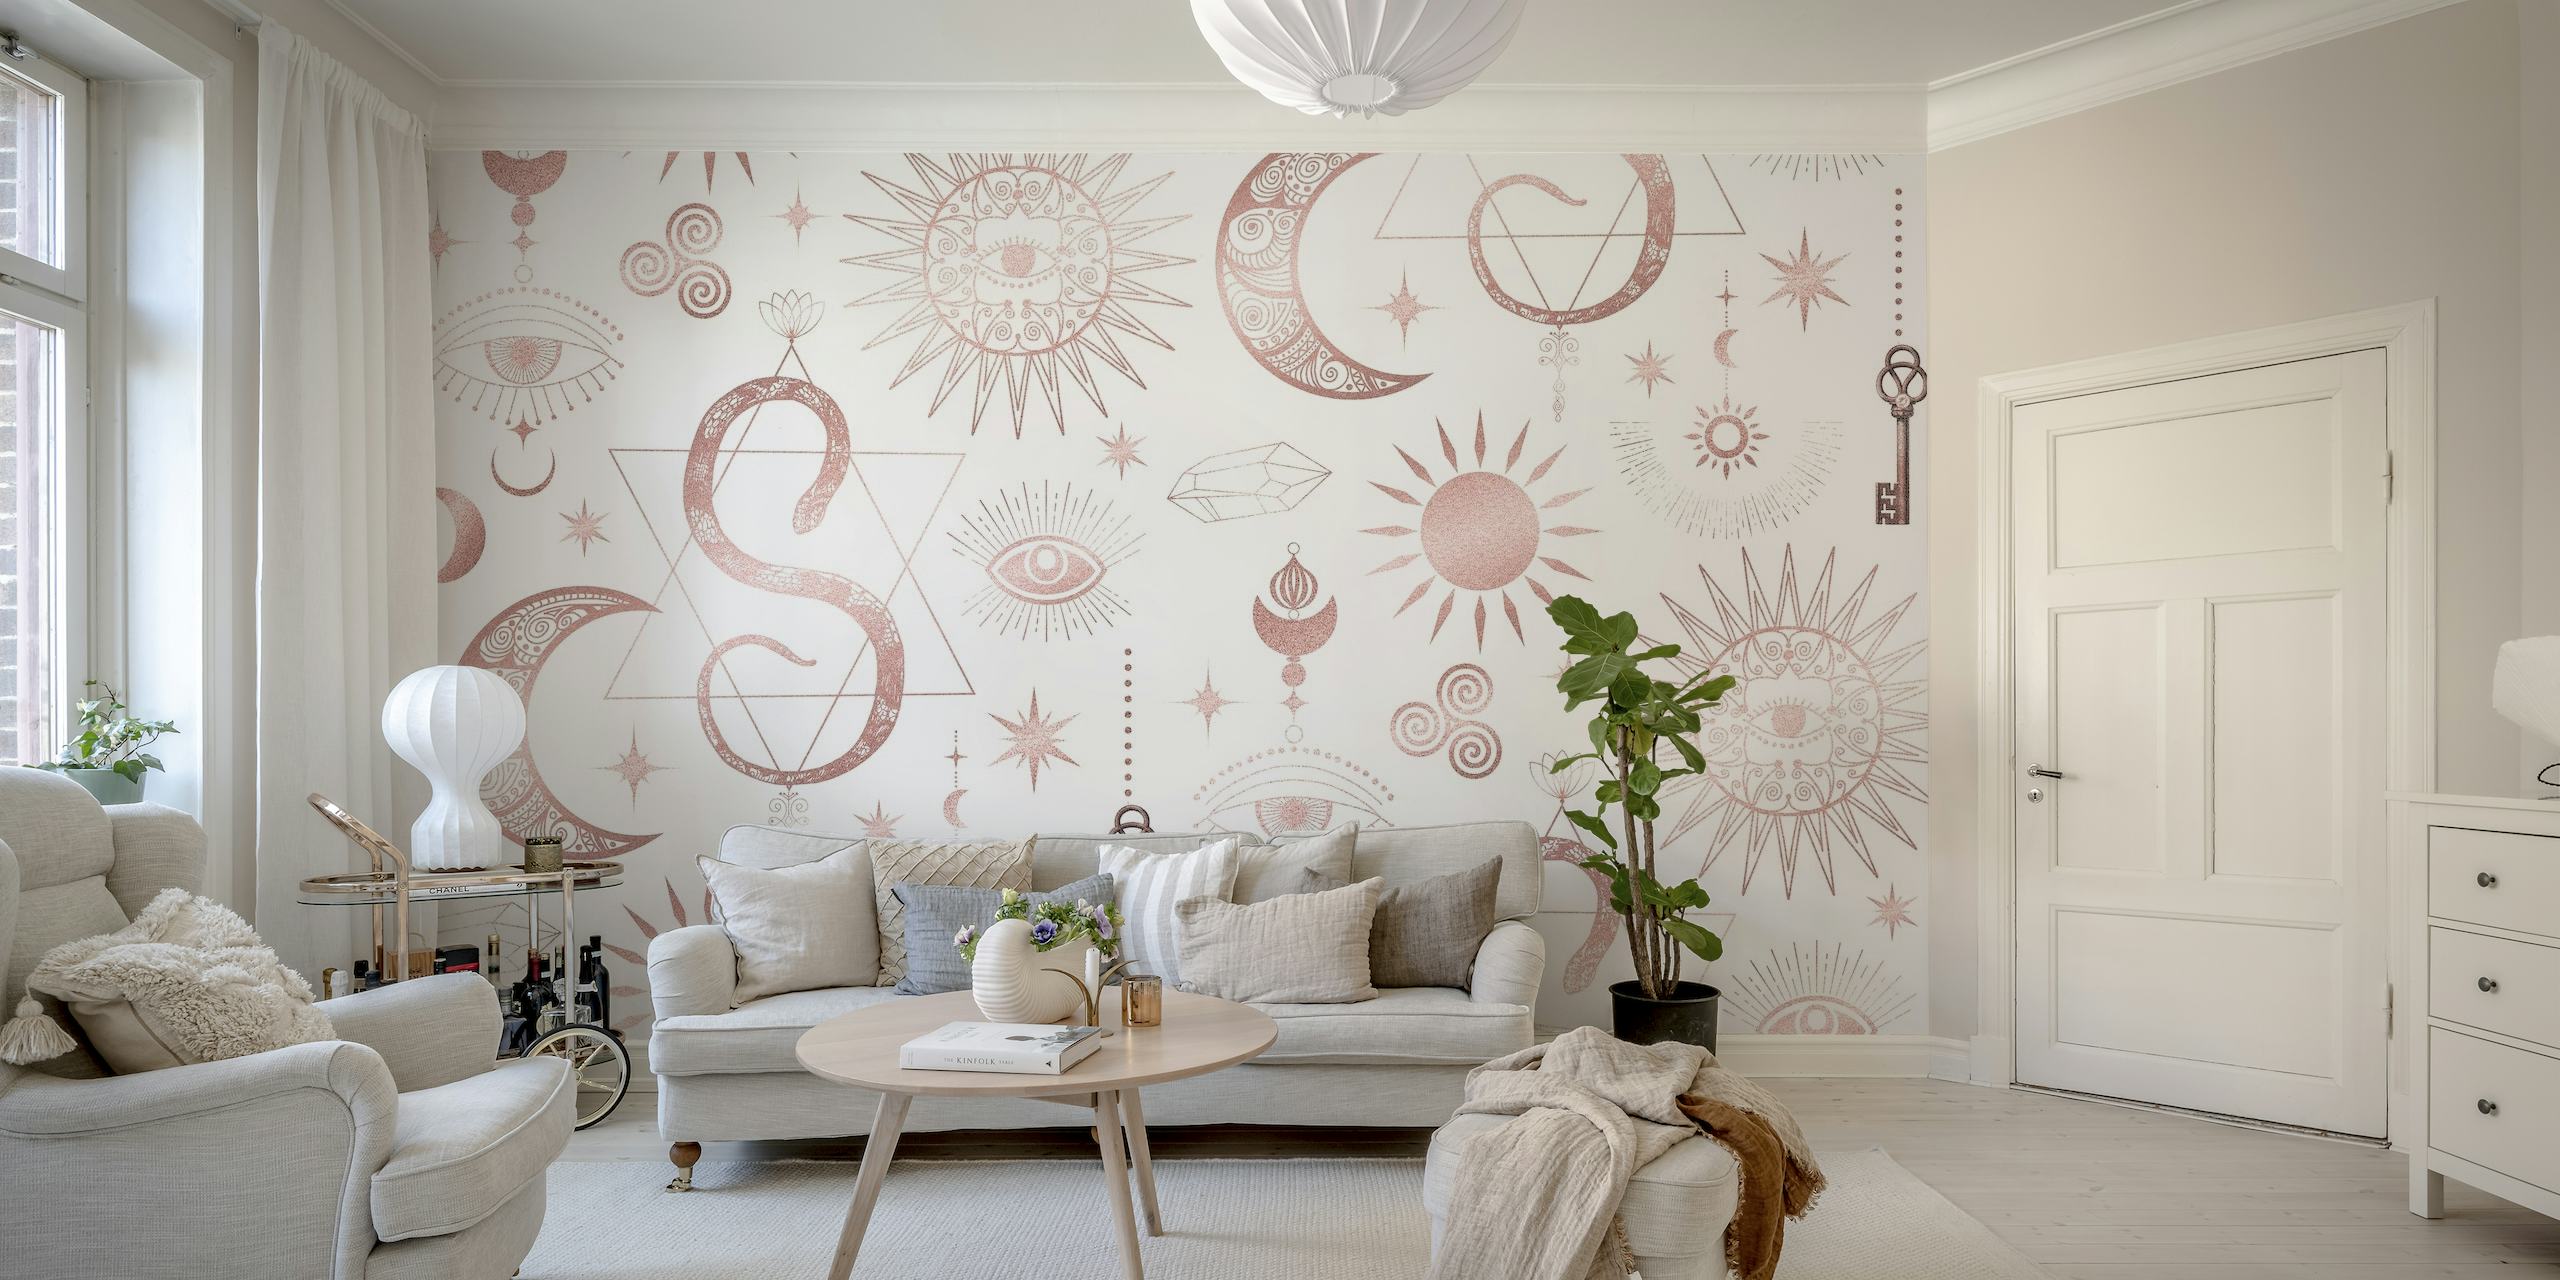 Celestial Magic Esoteric wall mural with moons, suns, and stars